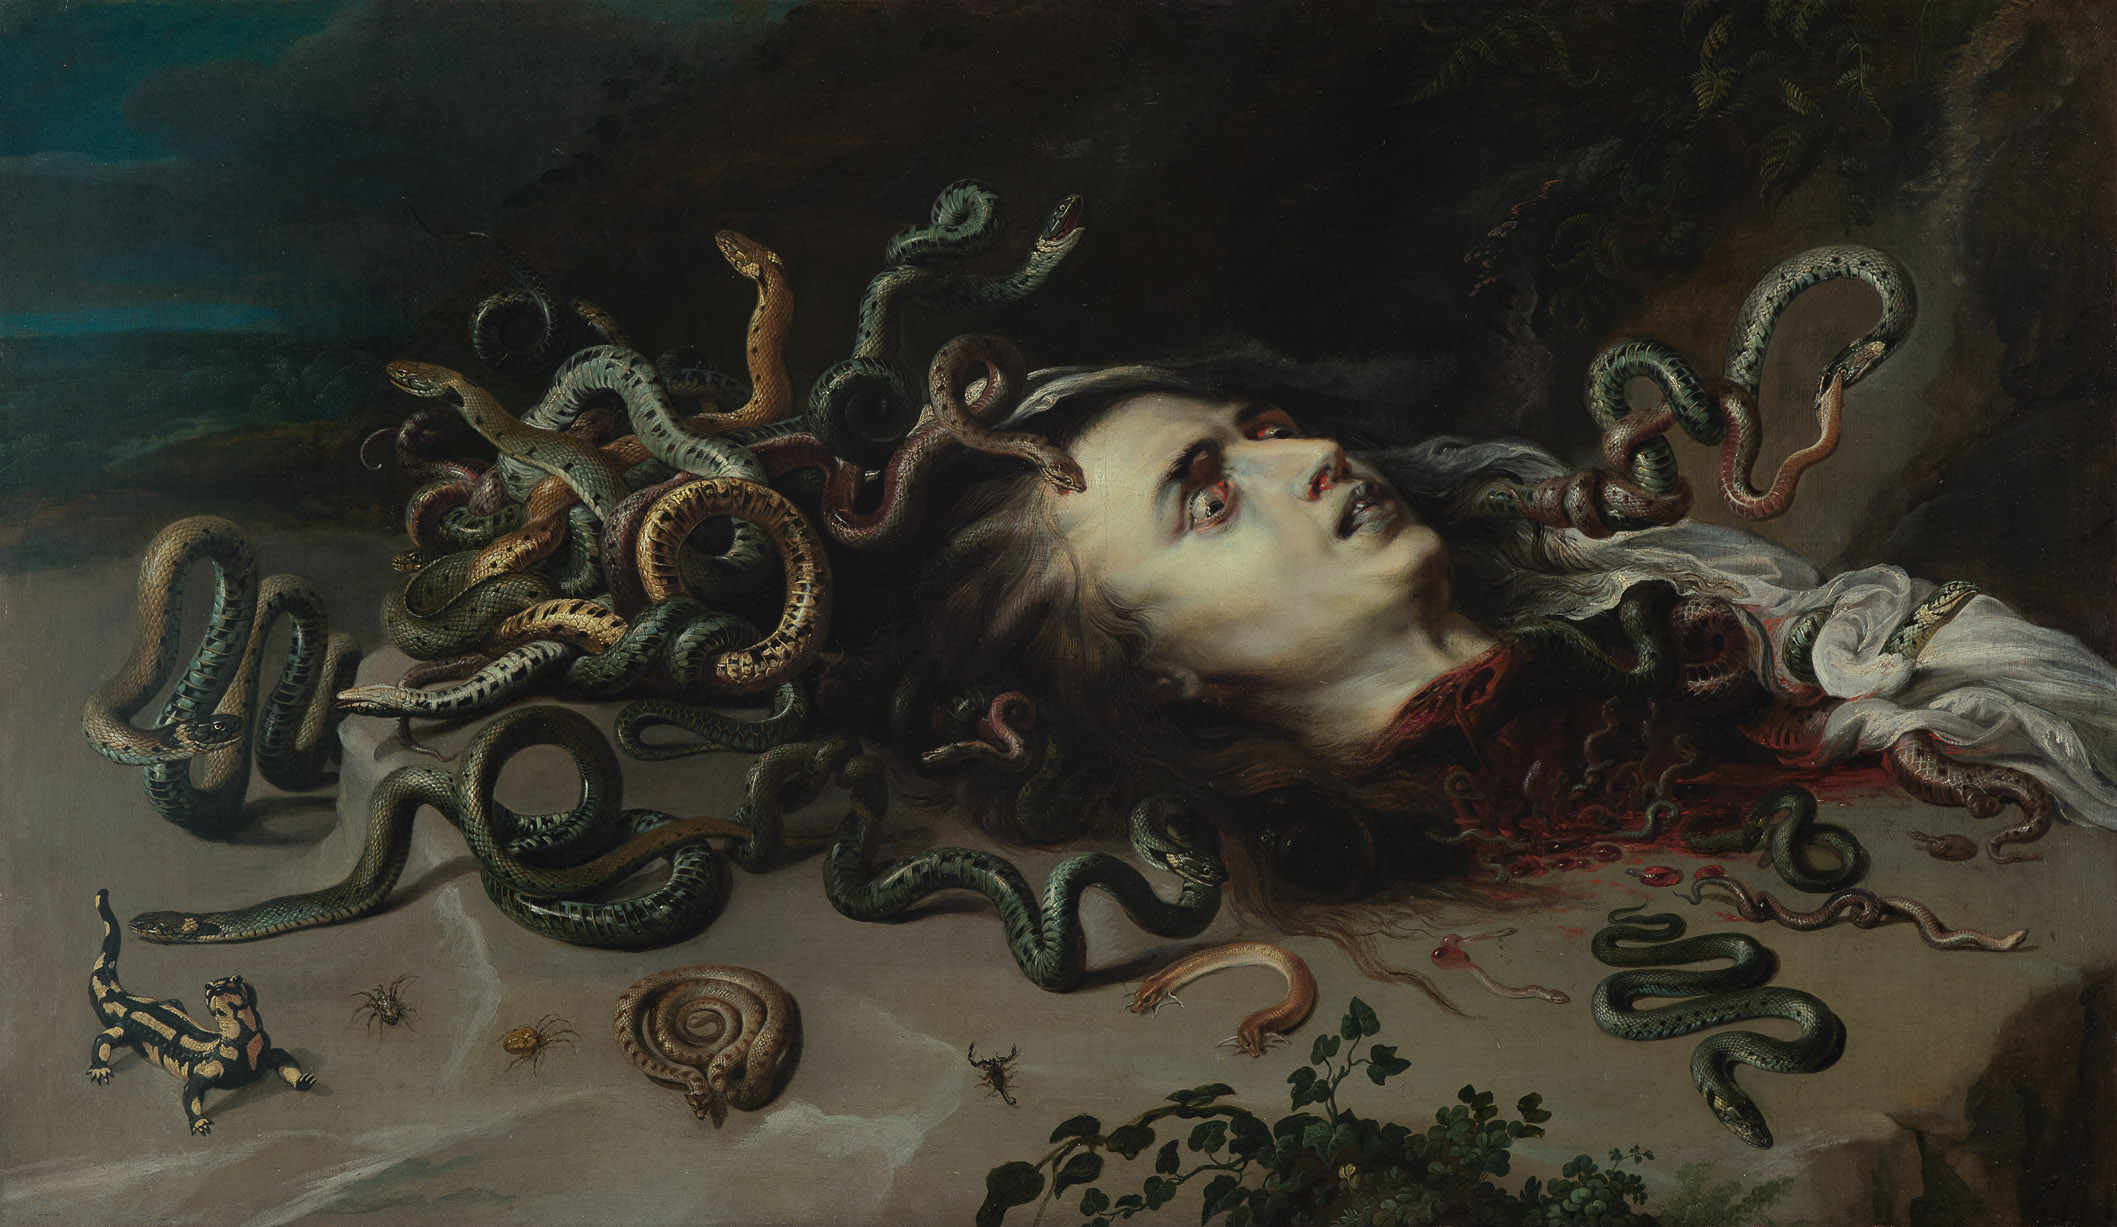 The Head of Medusa by Peter Paul Rubens - 1617–18 - 68.5 x 118 cm Kunsthistorisches Museum